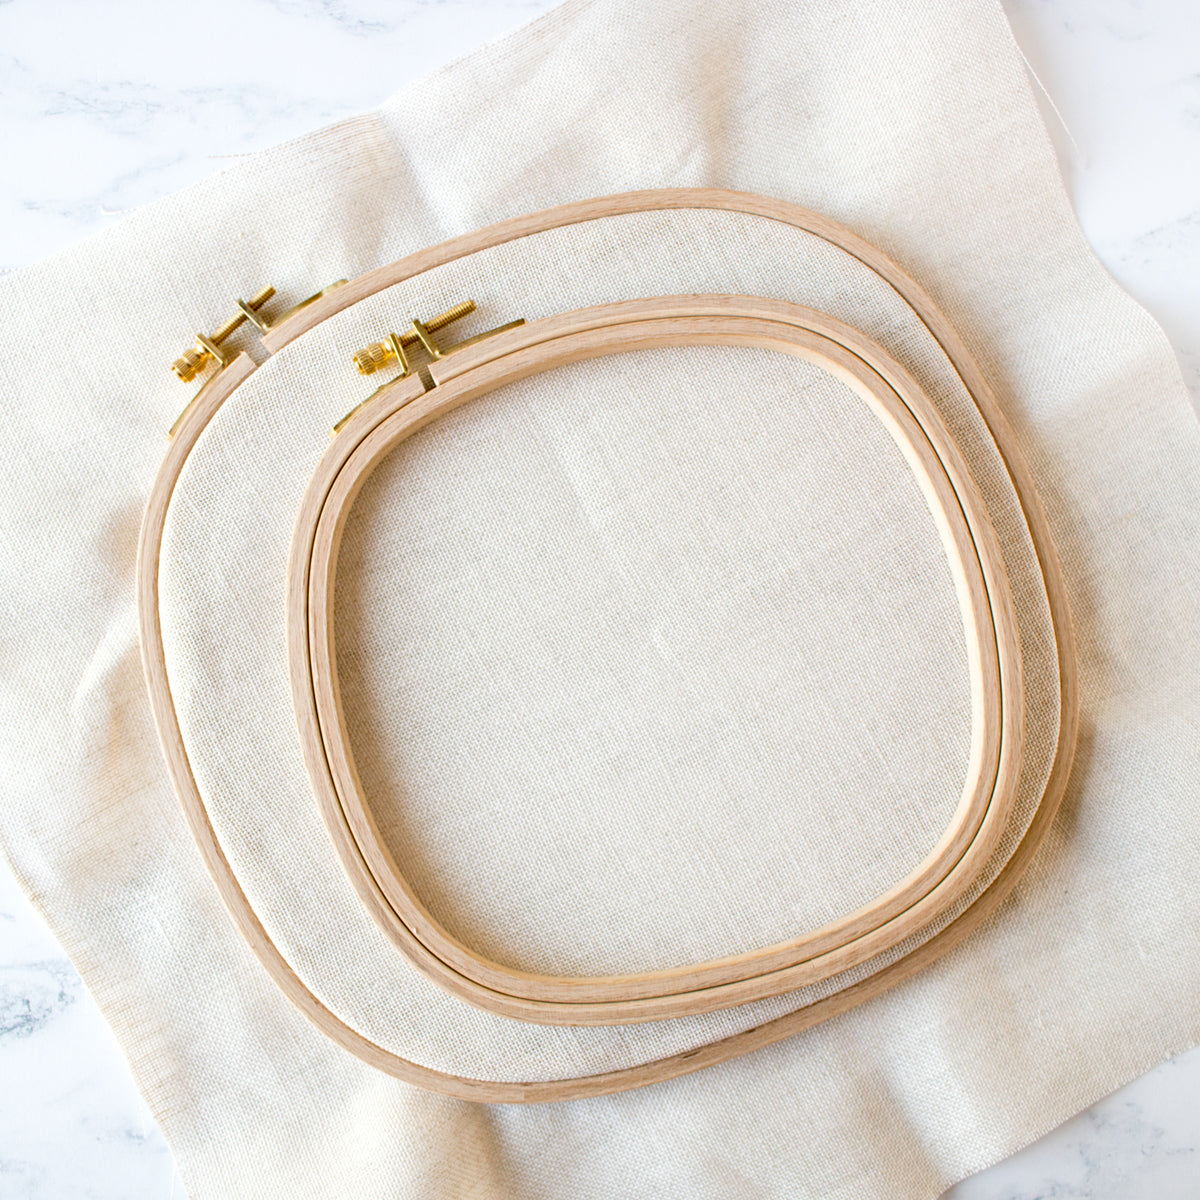 Premium Hard Wood Embroidery Hoops - Square